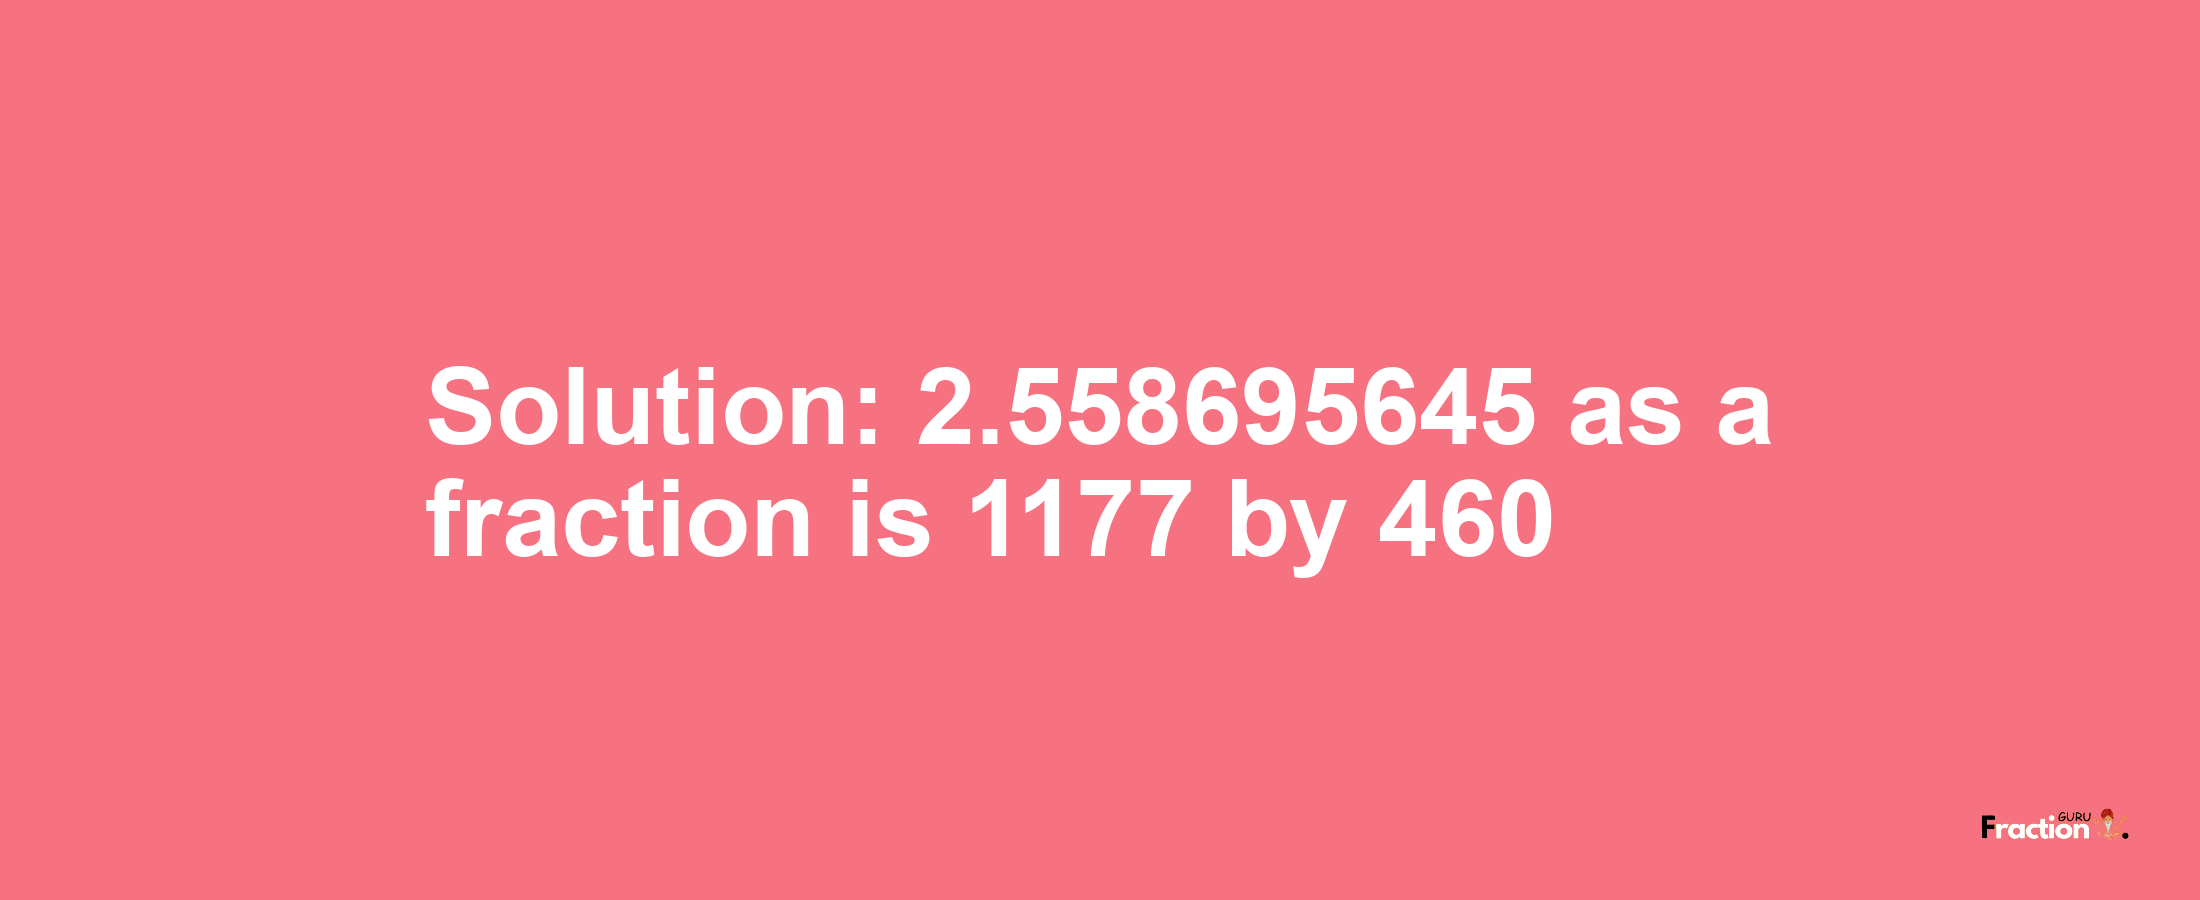 Solution:2.558695645 as a fraction is 1177/460